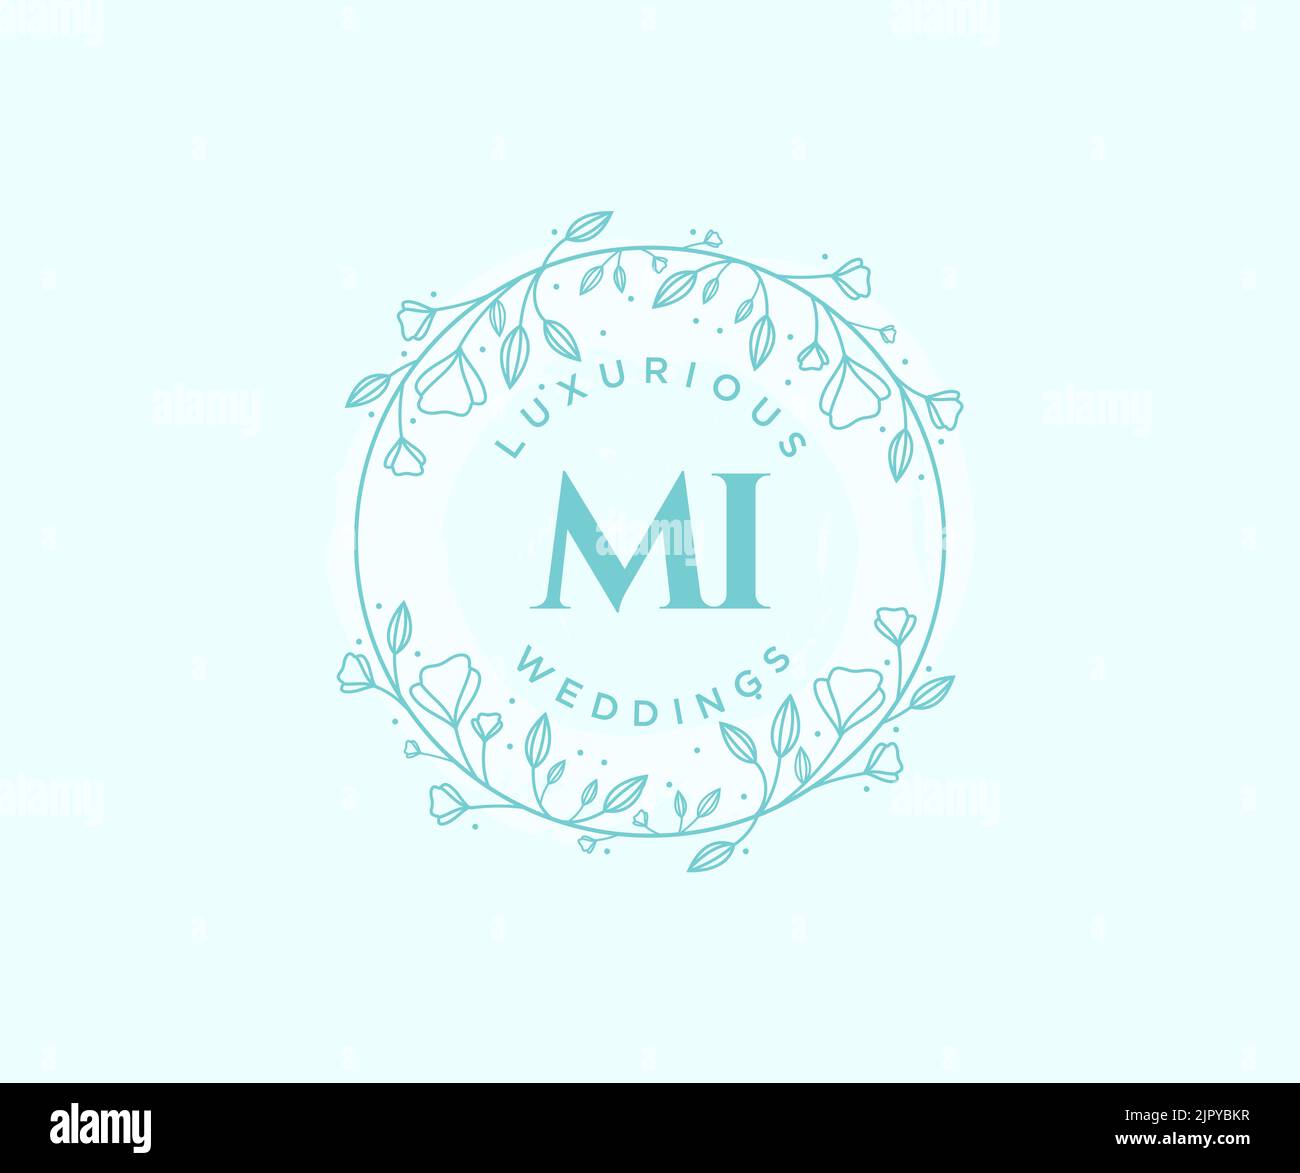 MI Initials letter Wedding monogram logos template, hand drawn modern minimalistic and floral templates for Invitation cards, Save the Date, elegant Stock Vector